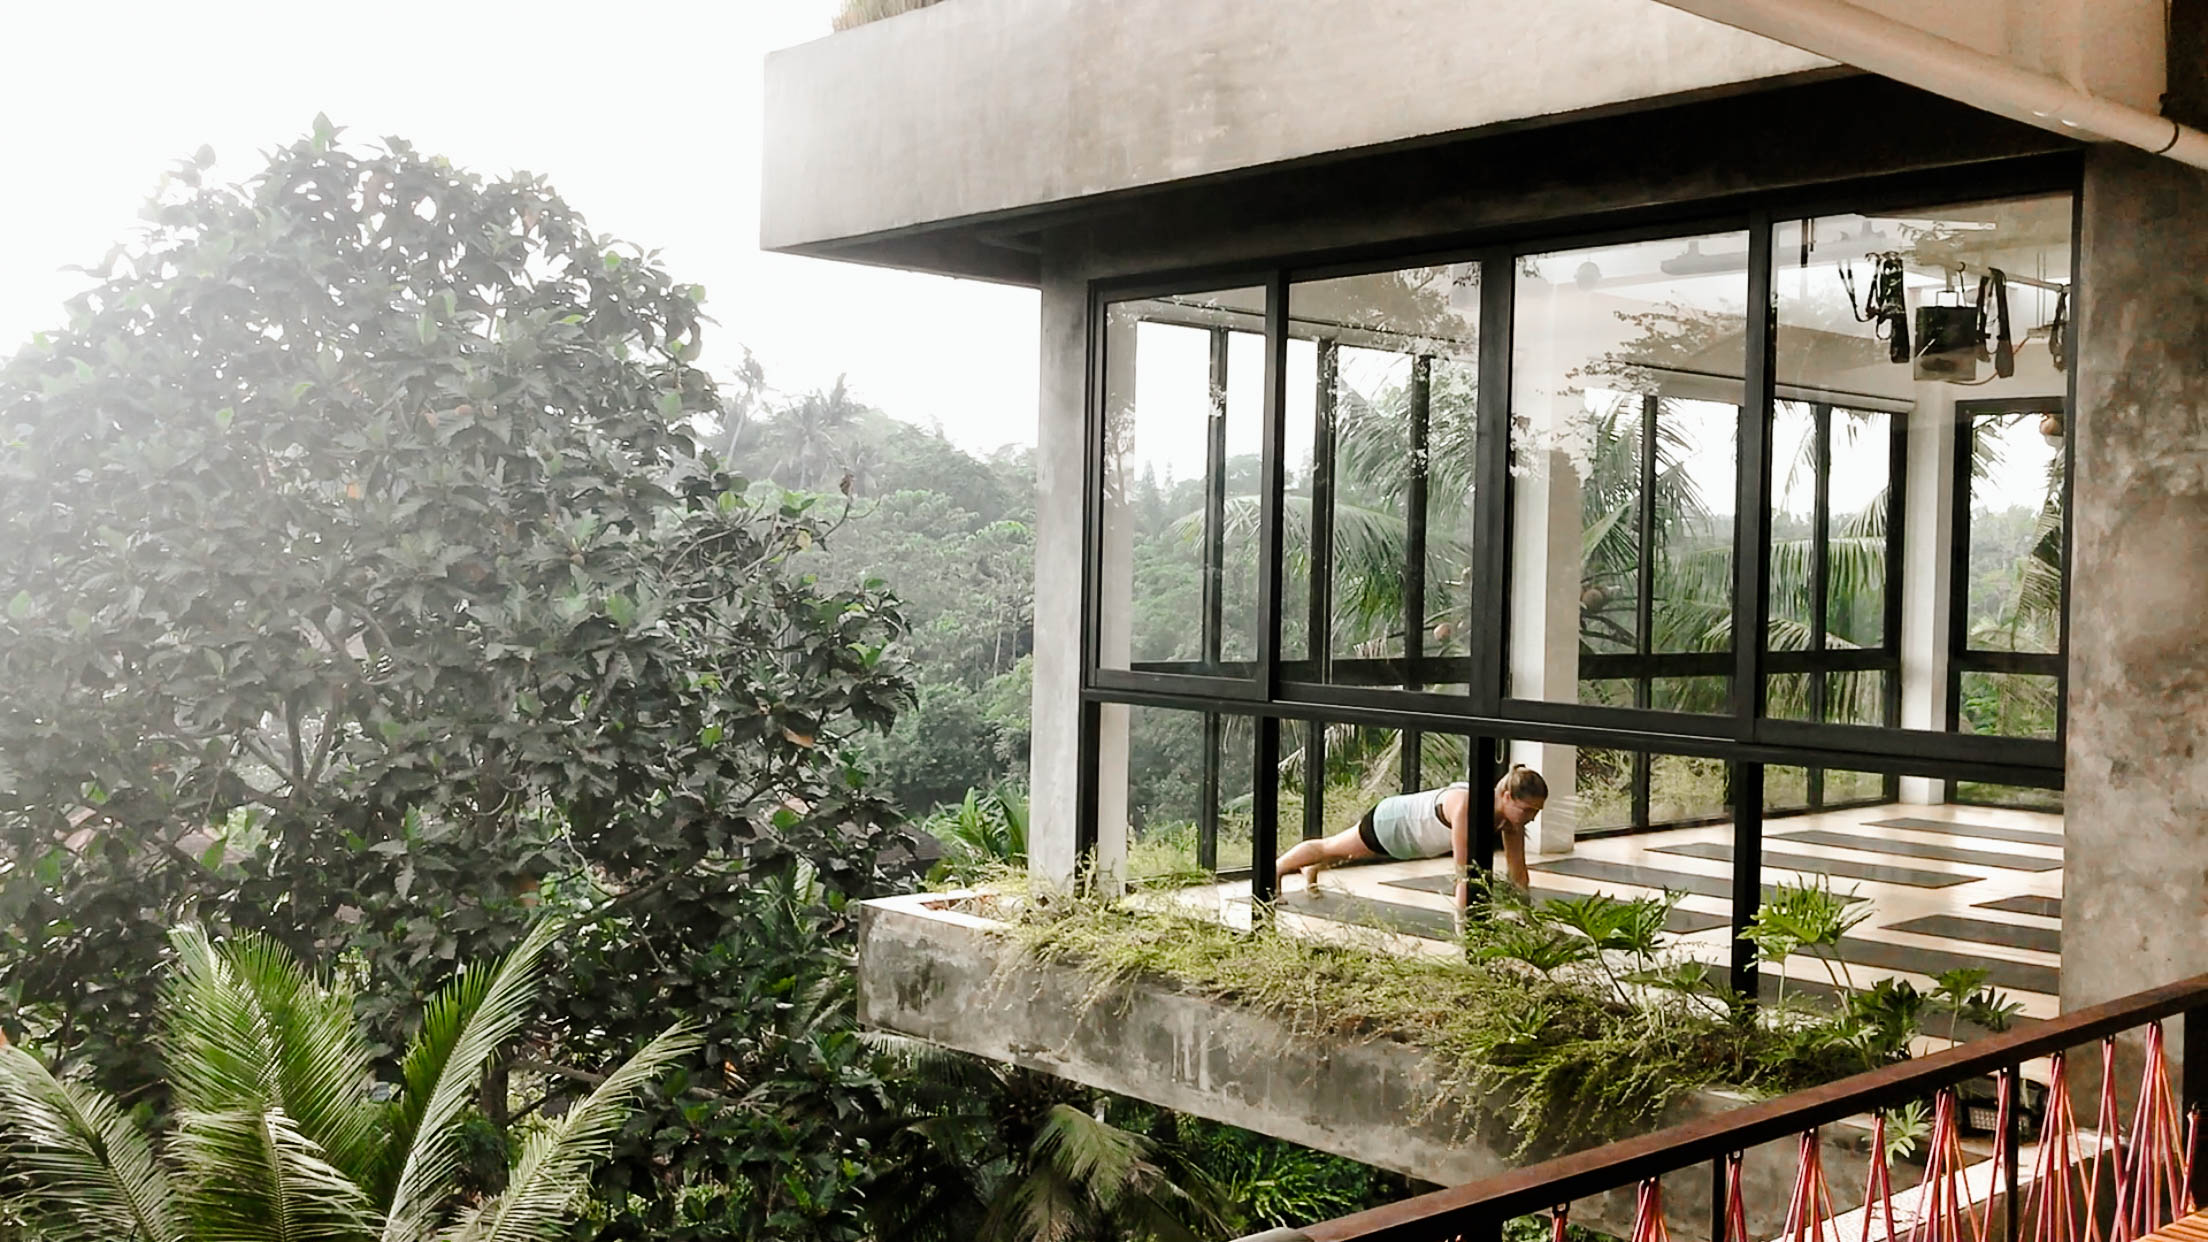 Last month, we had the opportunity to join No Desk Project, a startup coliving and coworking wellness retreat for entrepreneurs in Ubud, Bali while working at the Outpost coworking space with major jungle vibes - right up our alley!